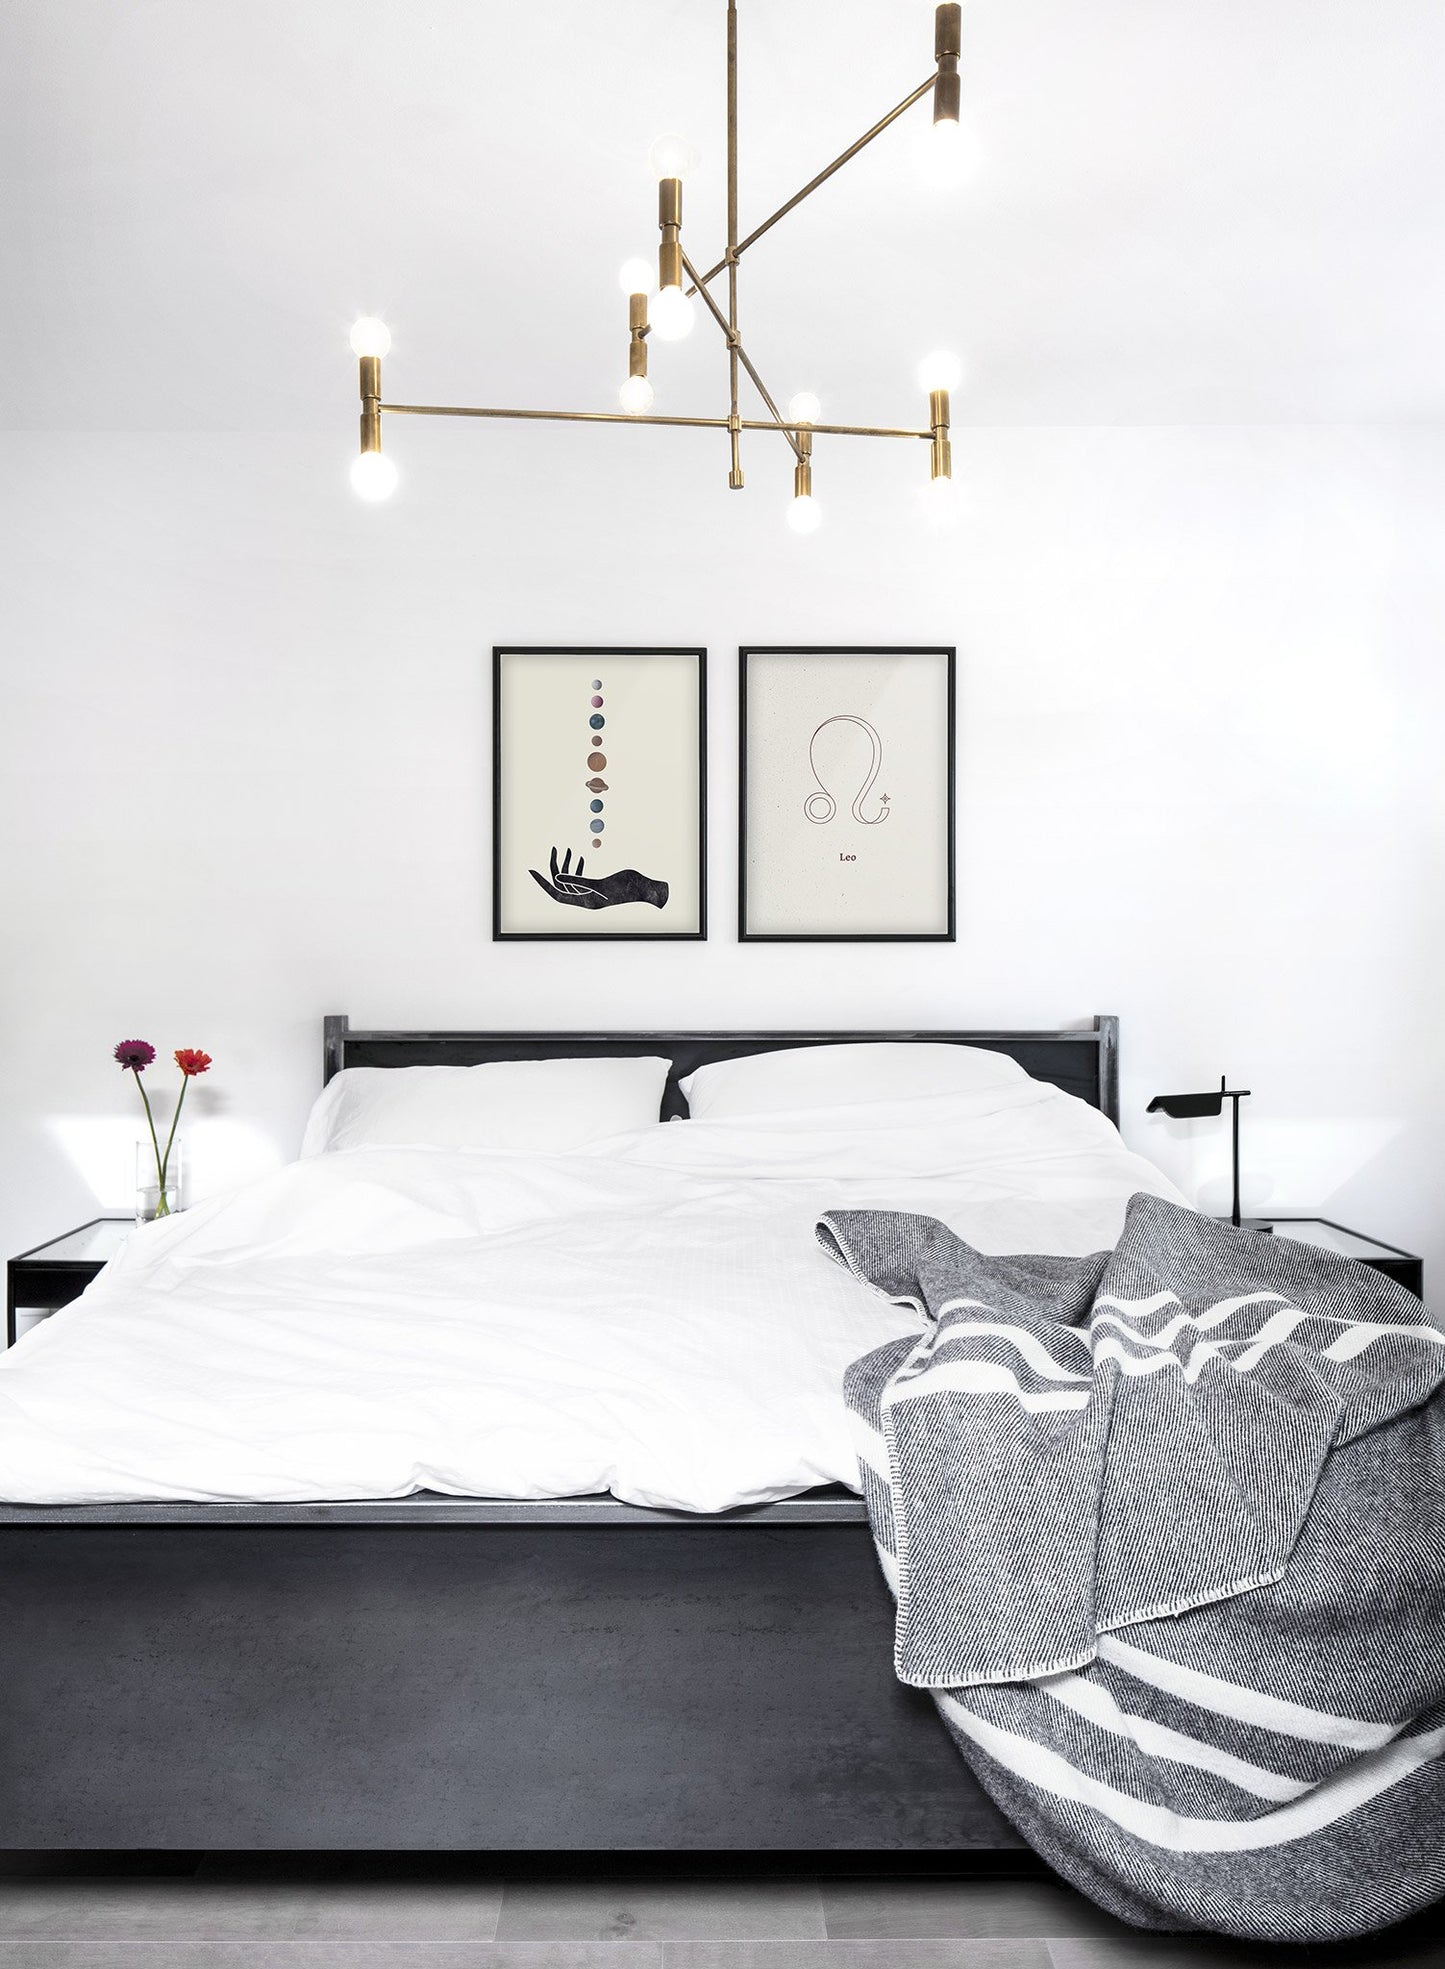 Minimalist celestial illustration poster by Opposite Wall with Leo symbol - Lifestyle Duo - Bedroom